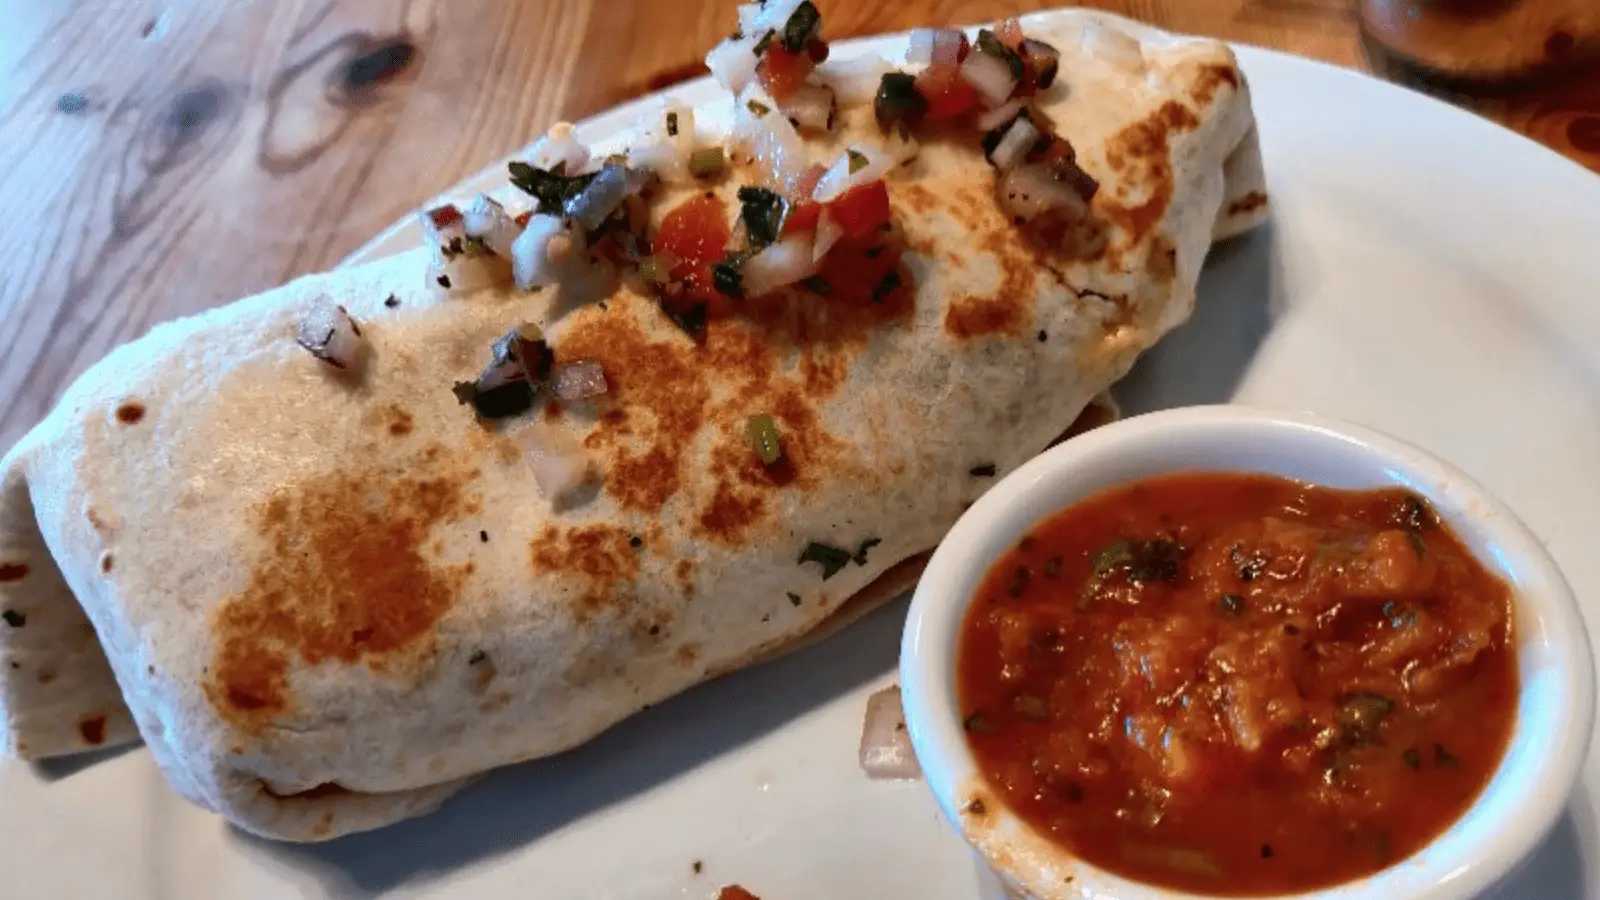 A burrito topped with salsa and herbs is placed on a white plate. Next to the burrito is a small white bowl filled with chunky red salsa. The plate, perfect for the best breakfast on the Monterey Peninsula, is set on a wooden table.